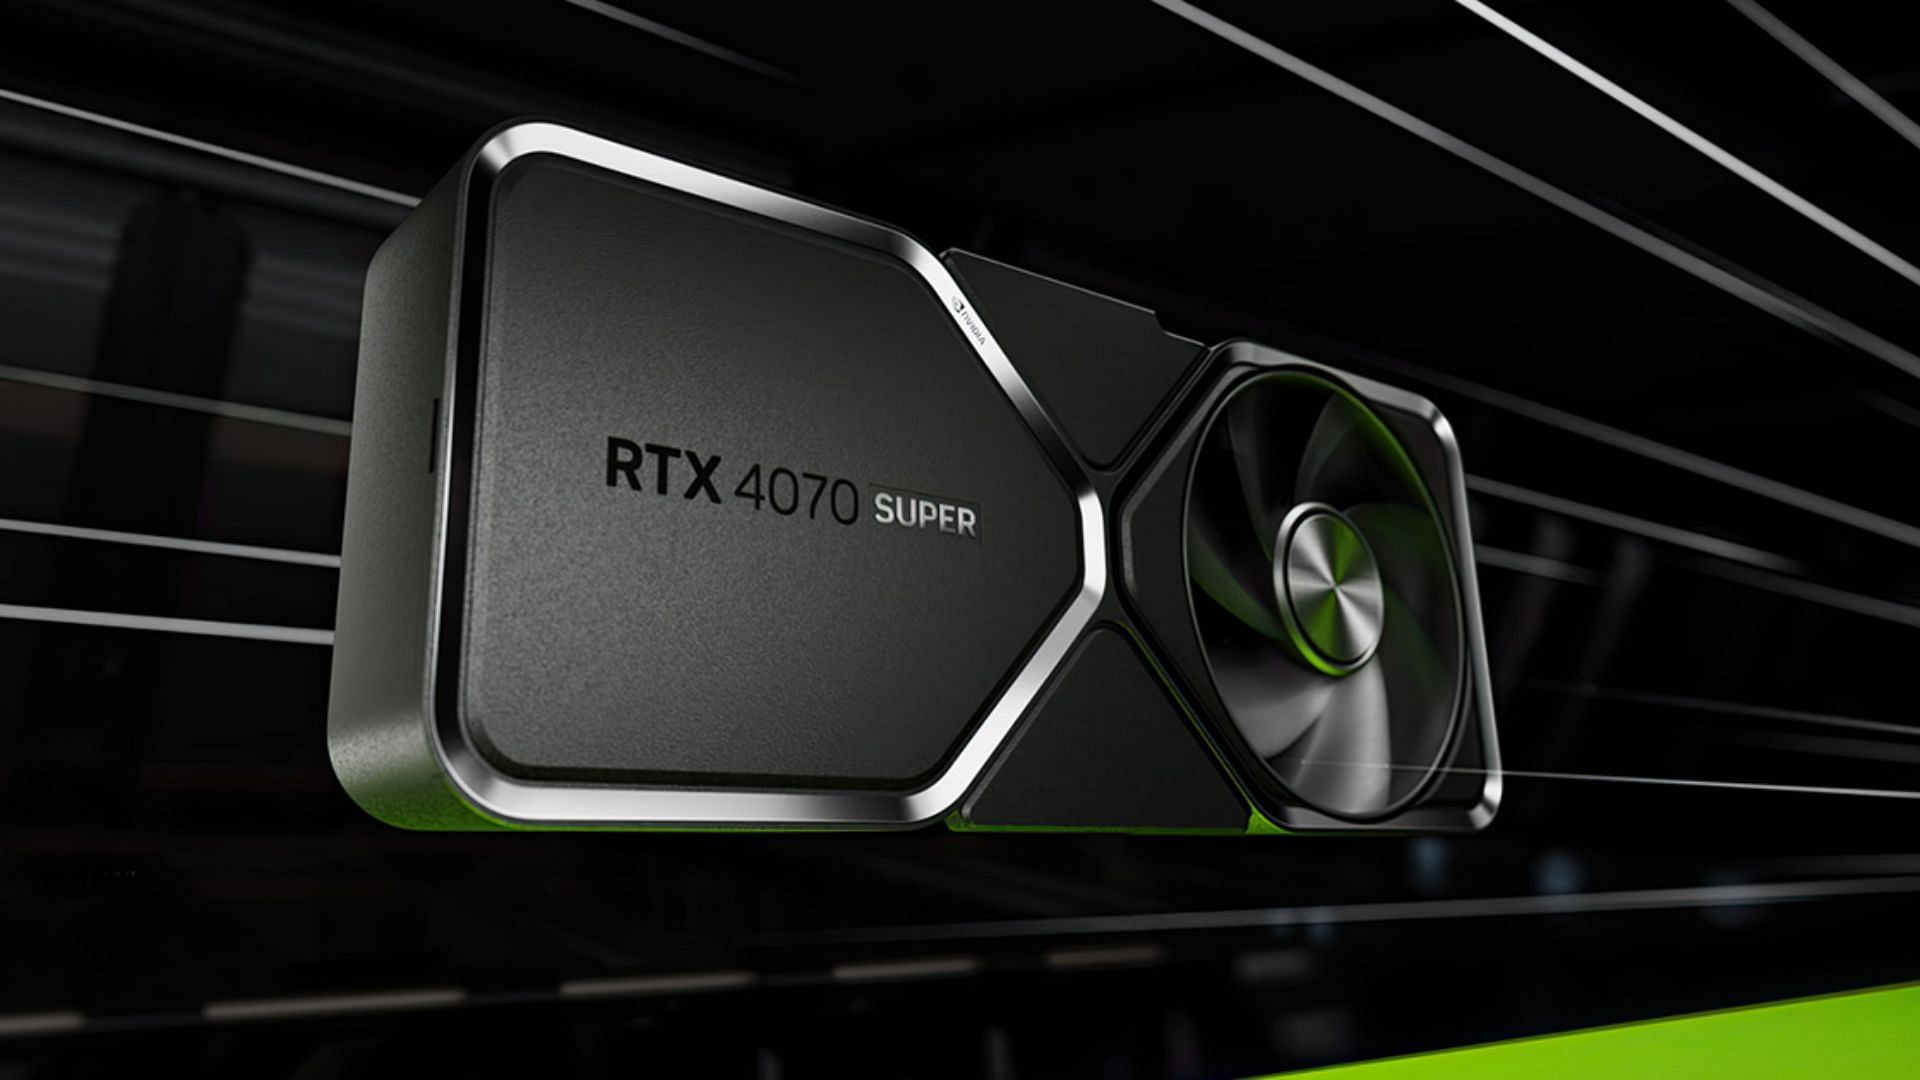 The Nvidia RTX 4070 Super is built for 1440p gaming (Image via Nvidia)